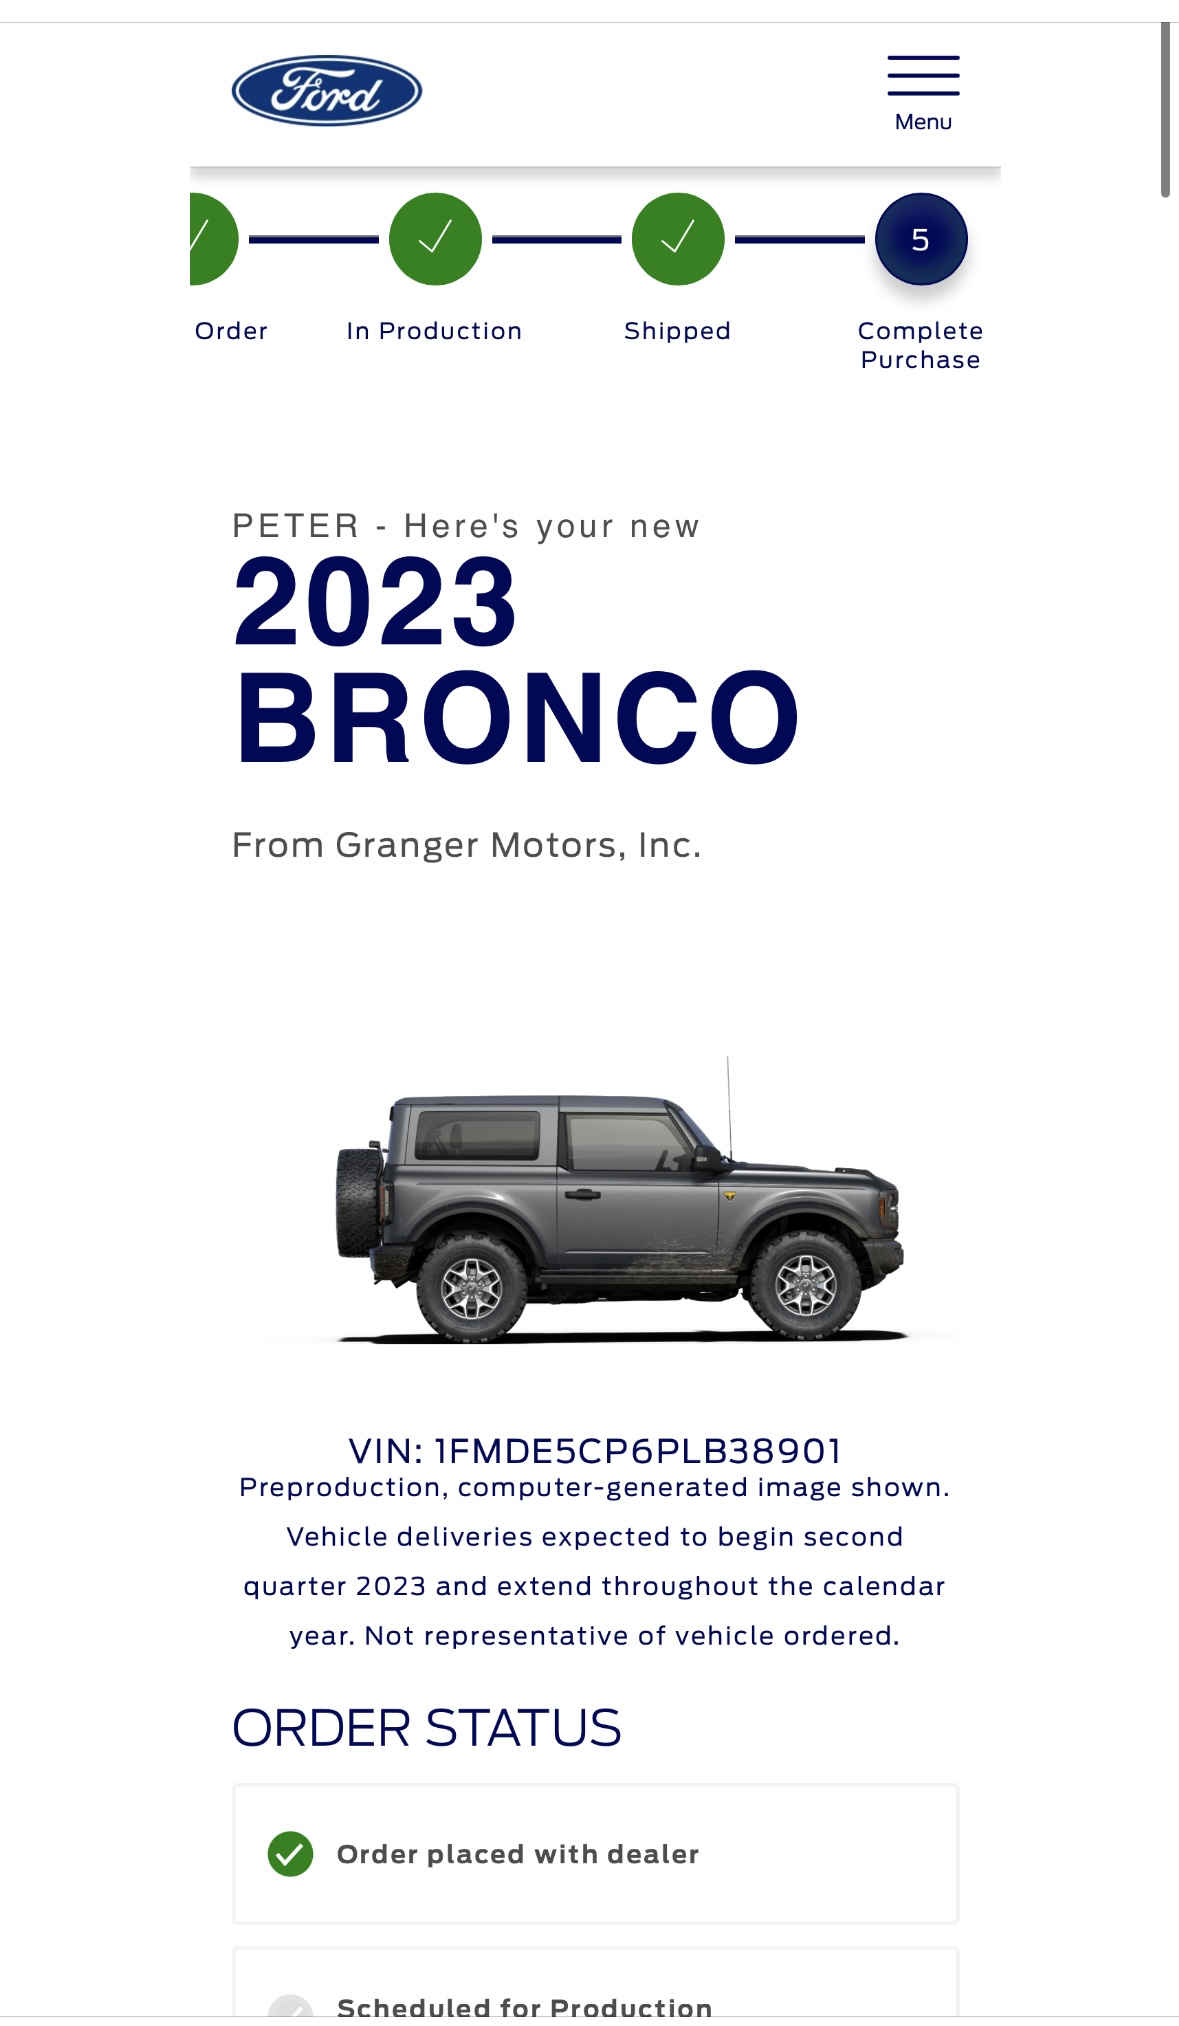 Ford Bronco CALLING ALL GRANGTOBER ORDER PLACERS IMG_7151